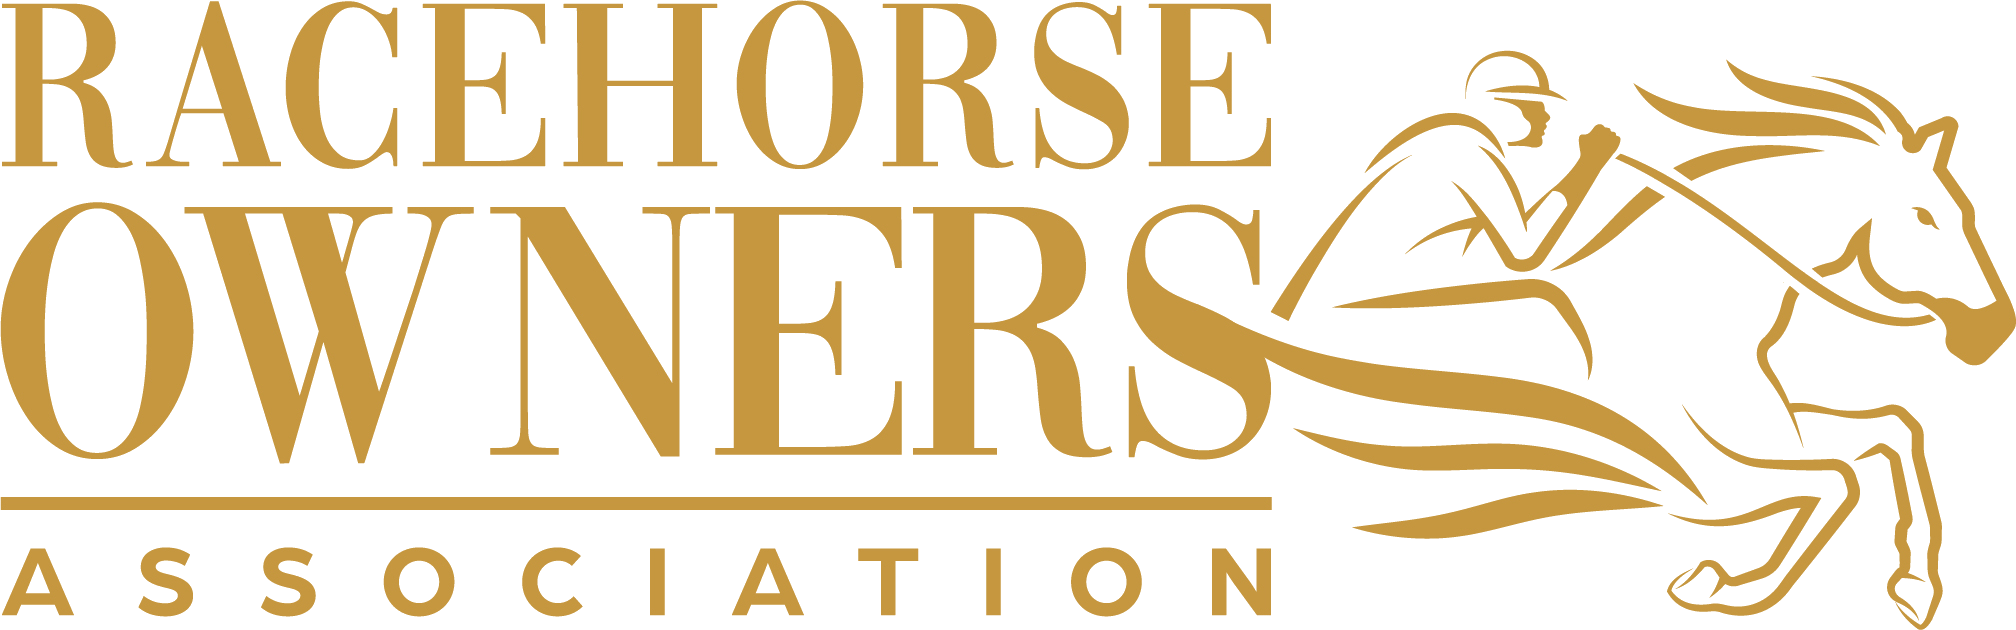 Racehorse Owners Association